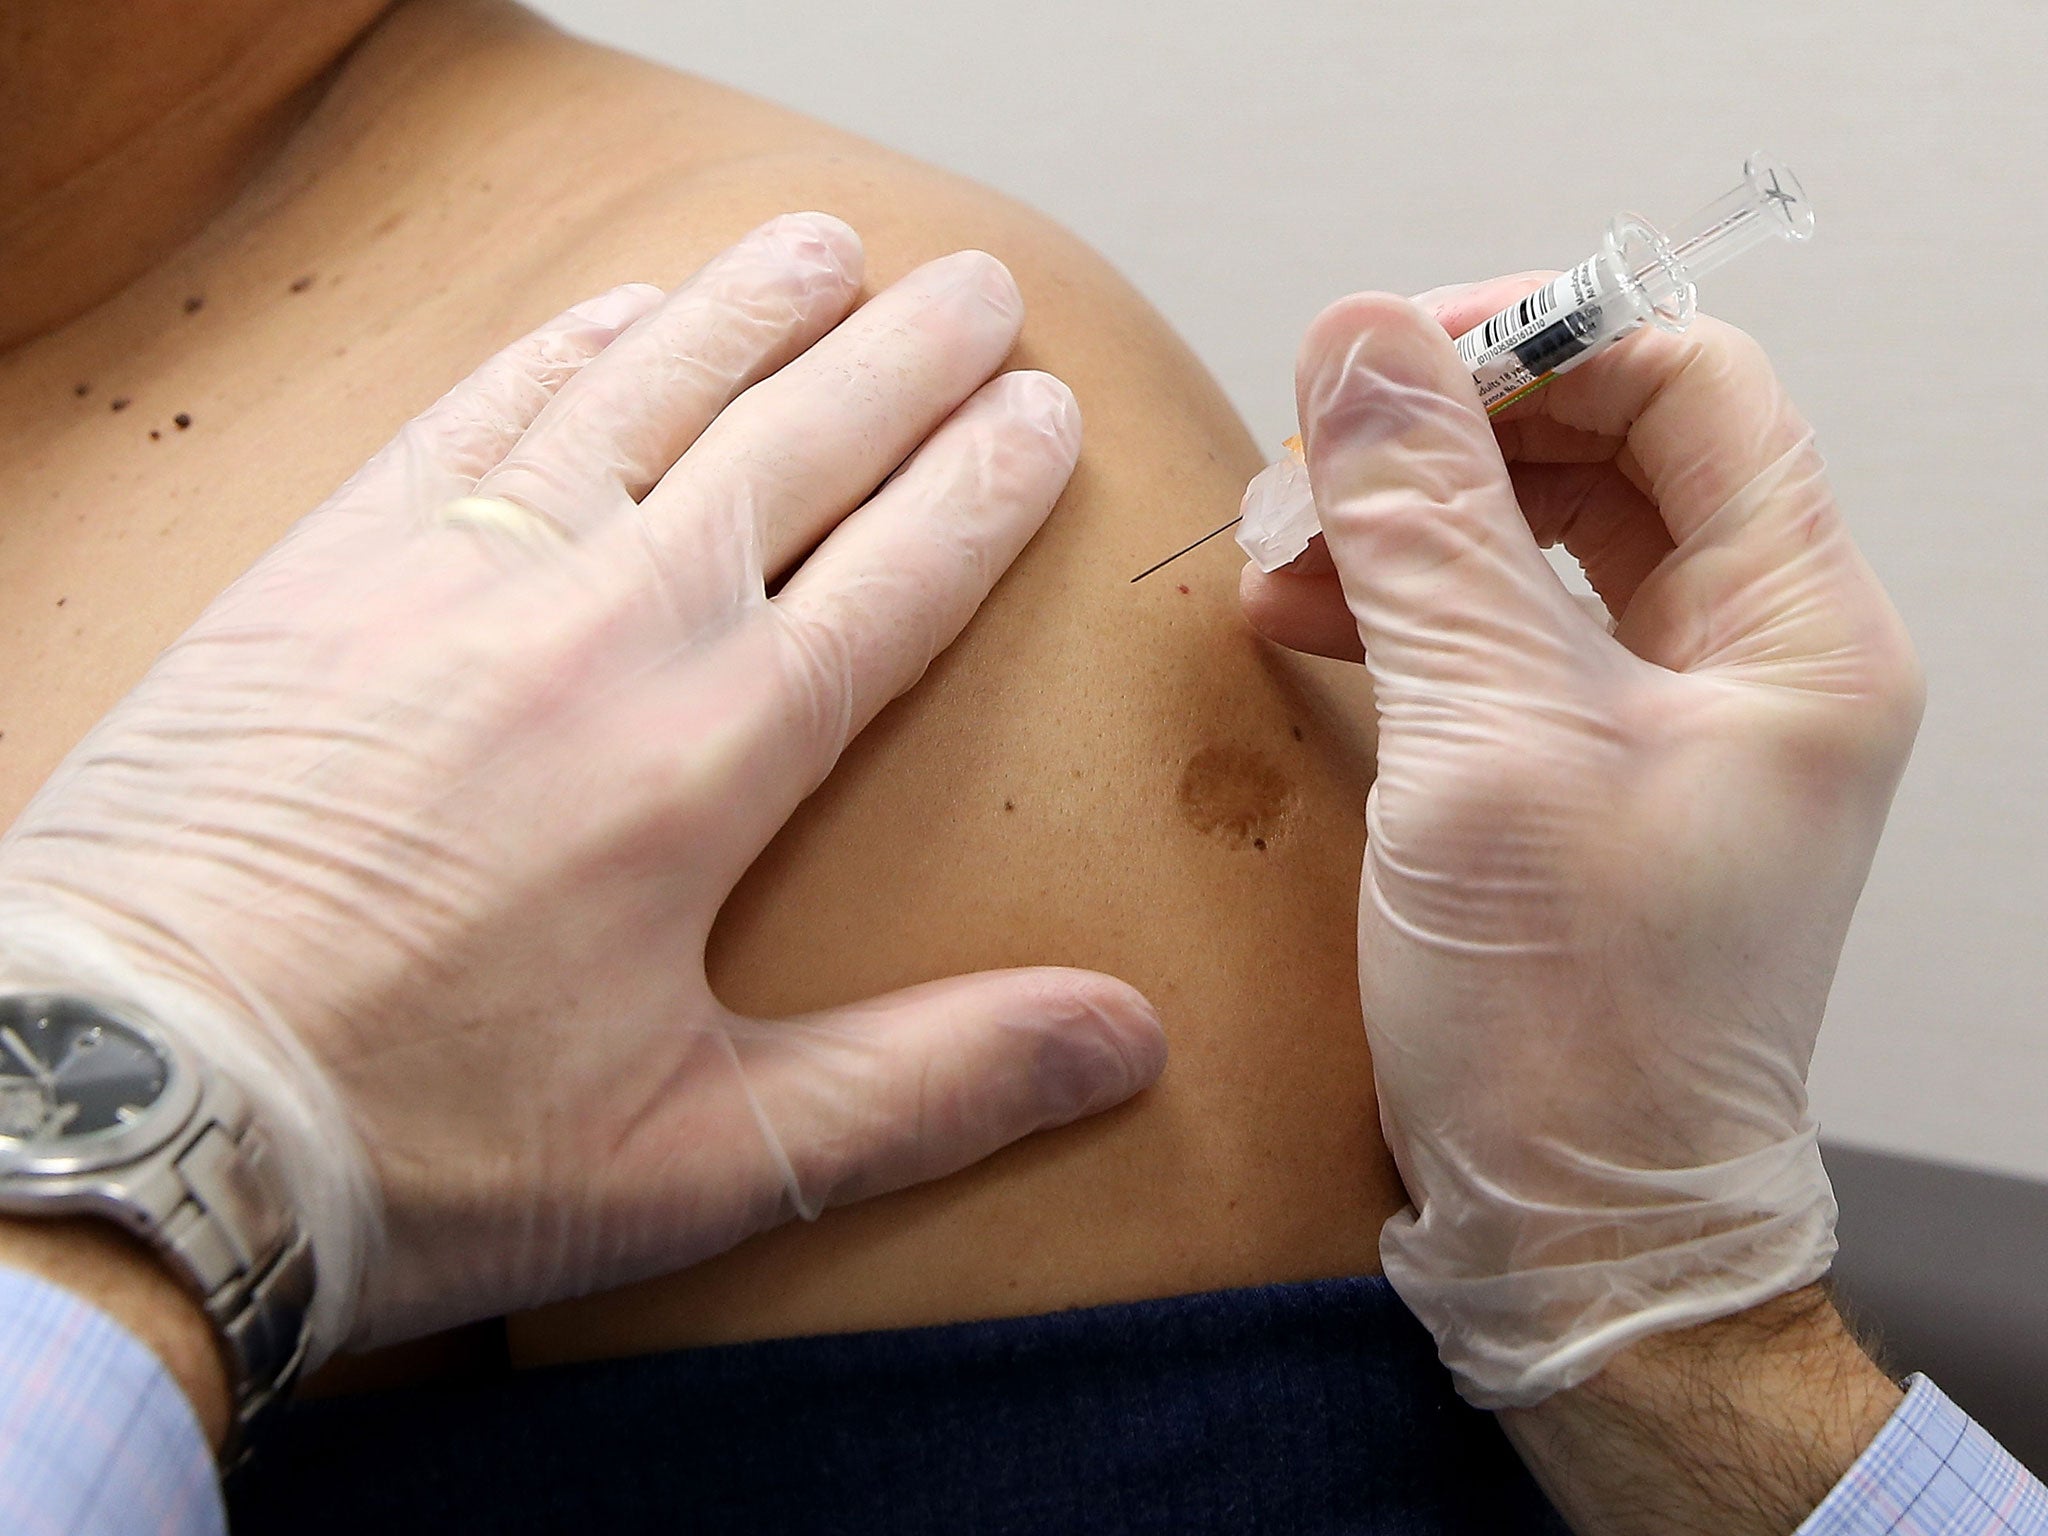 Ukrainian authorities are encouraging people to be vaccinated and seek medical advice with any symptoms